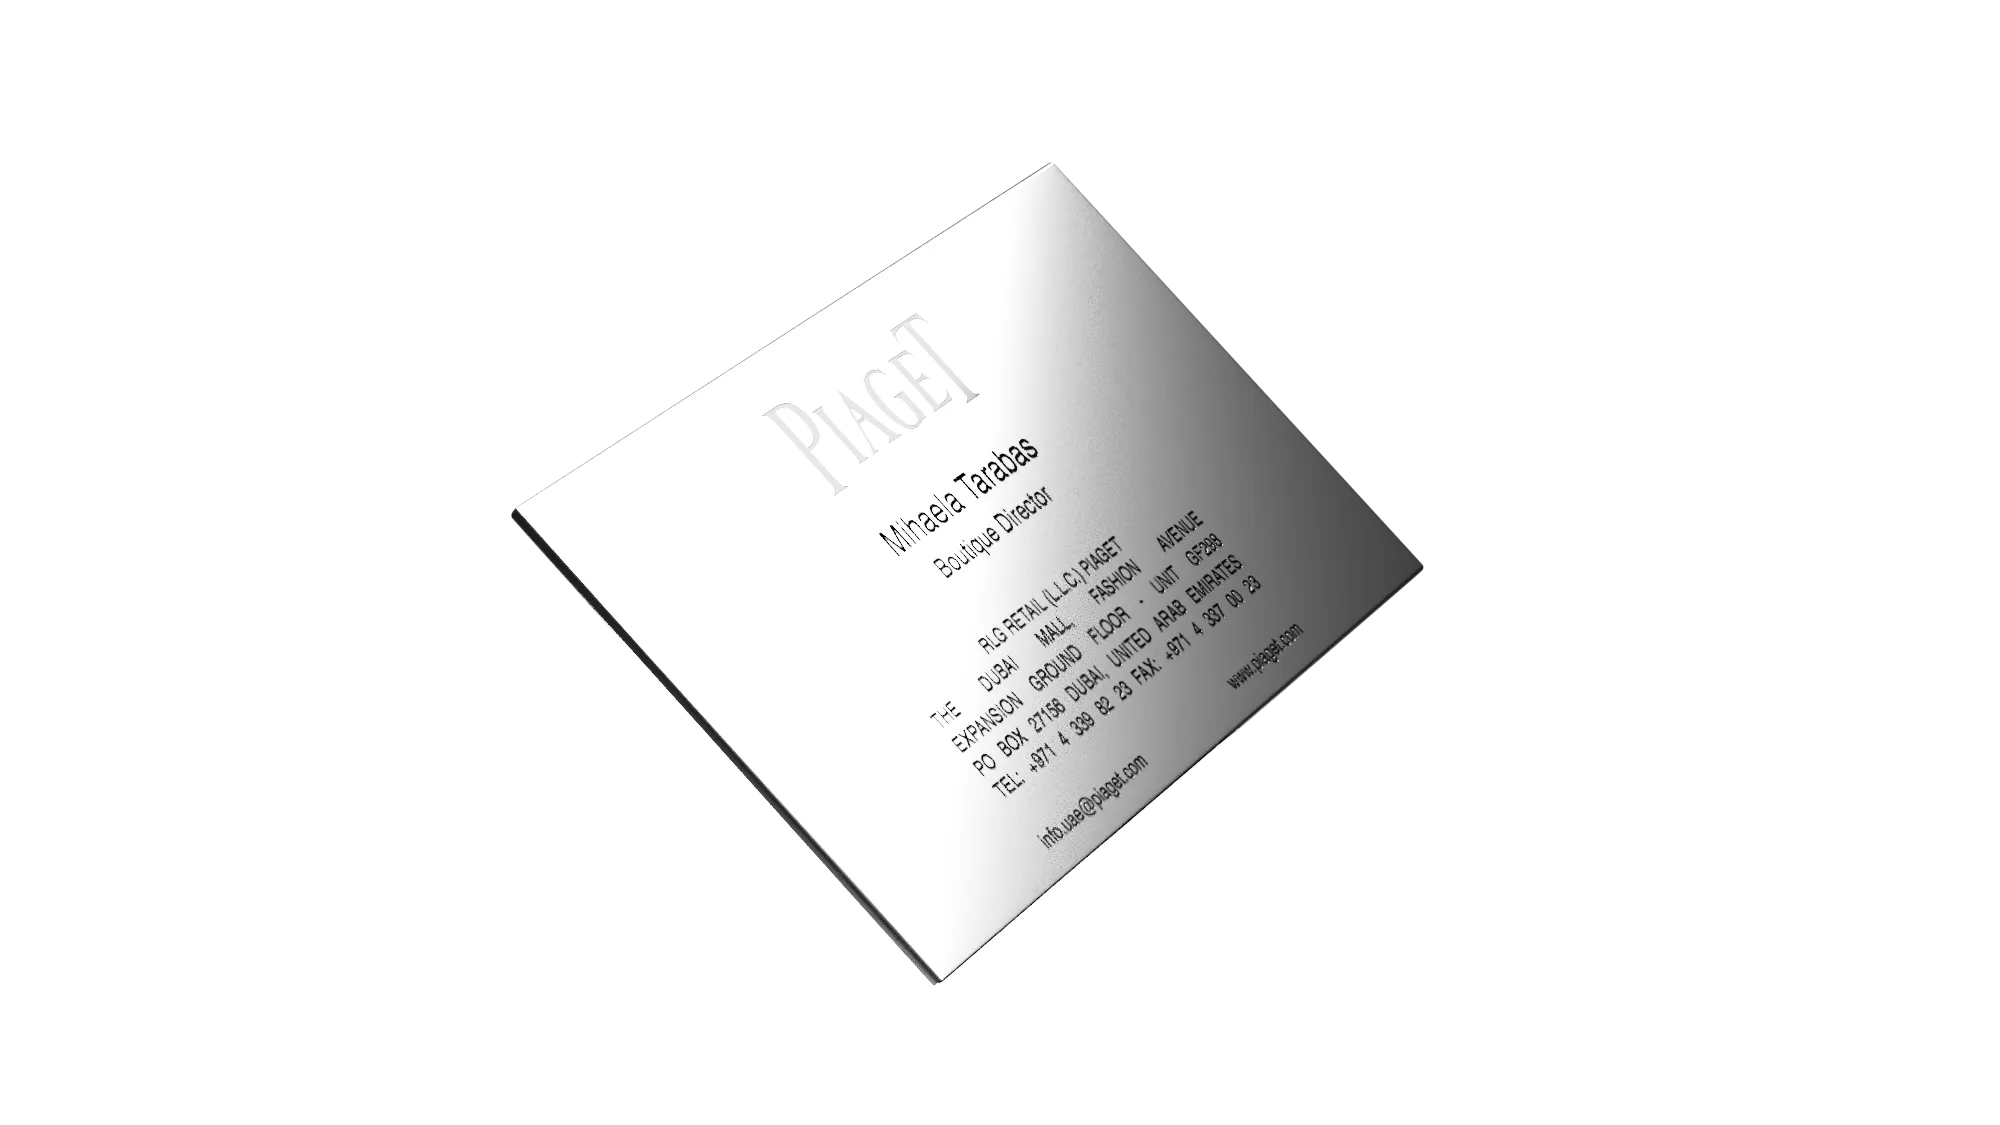 rendered sterling silver Piaget business card front